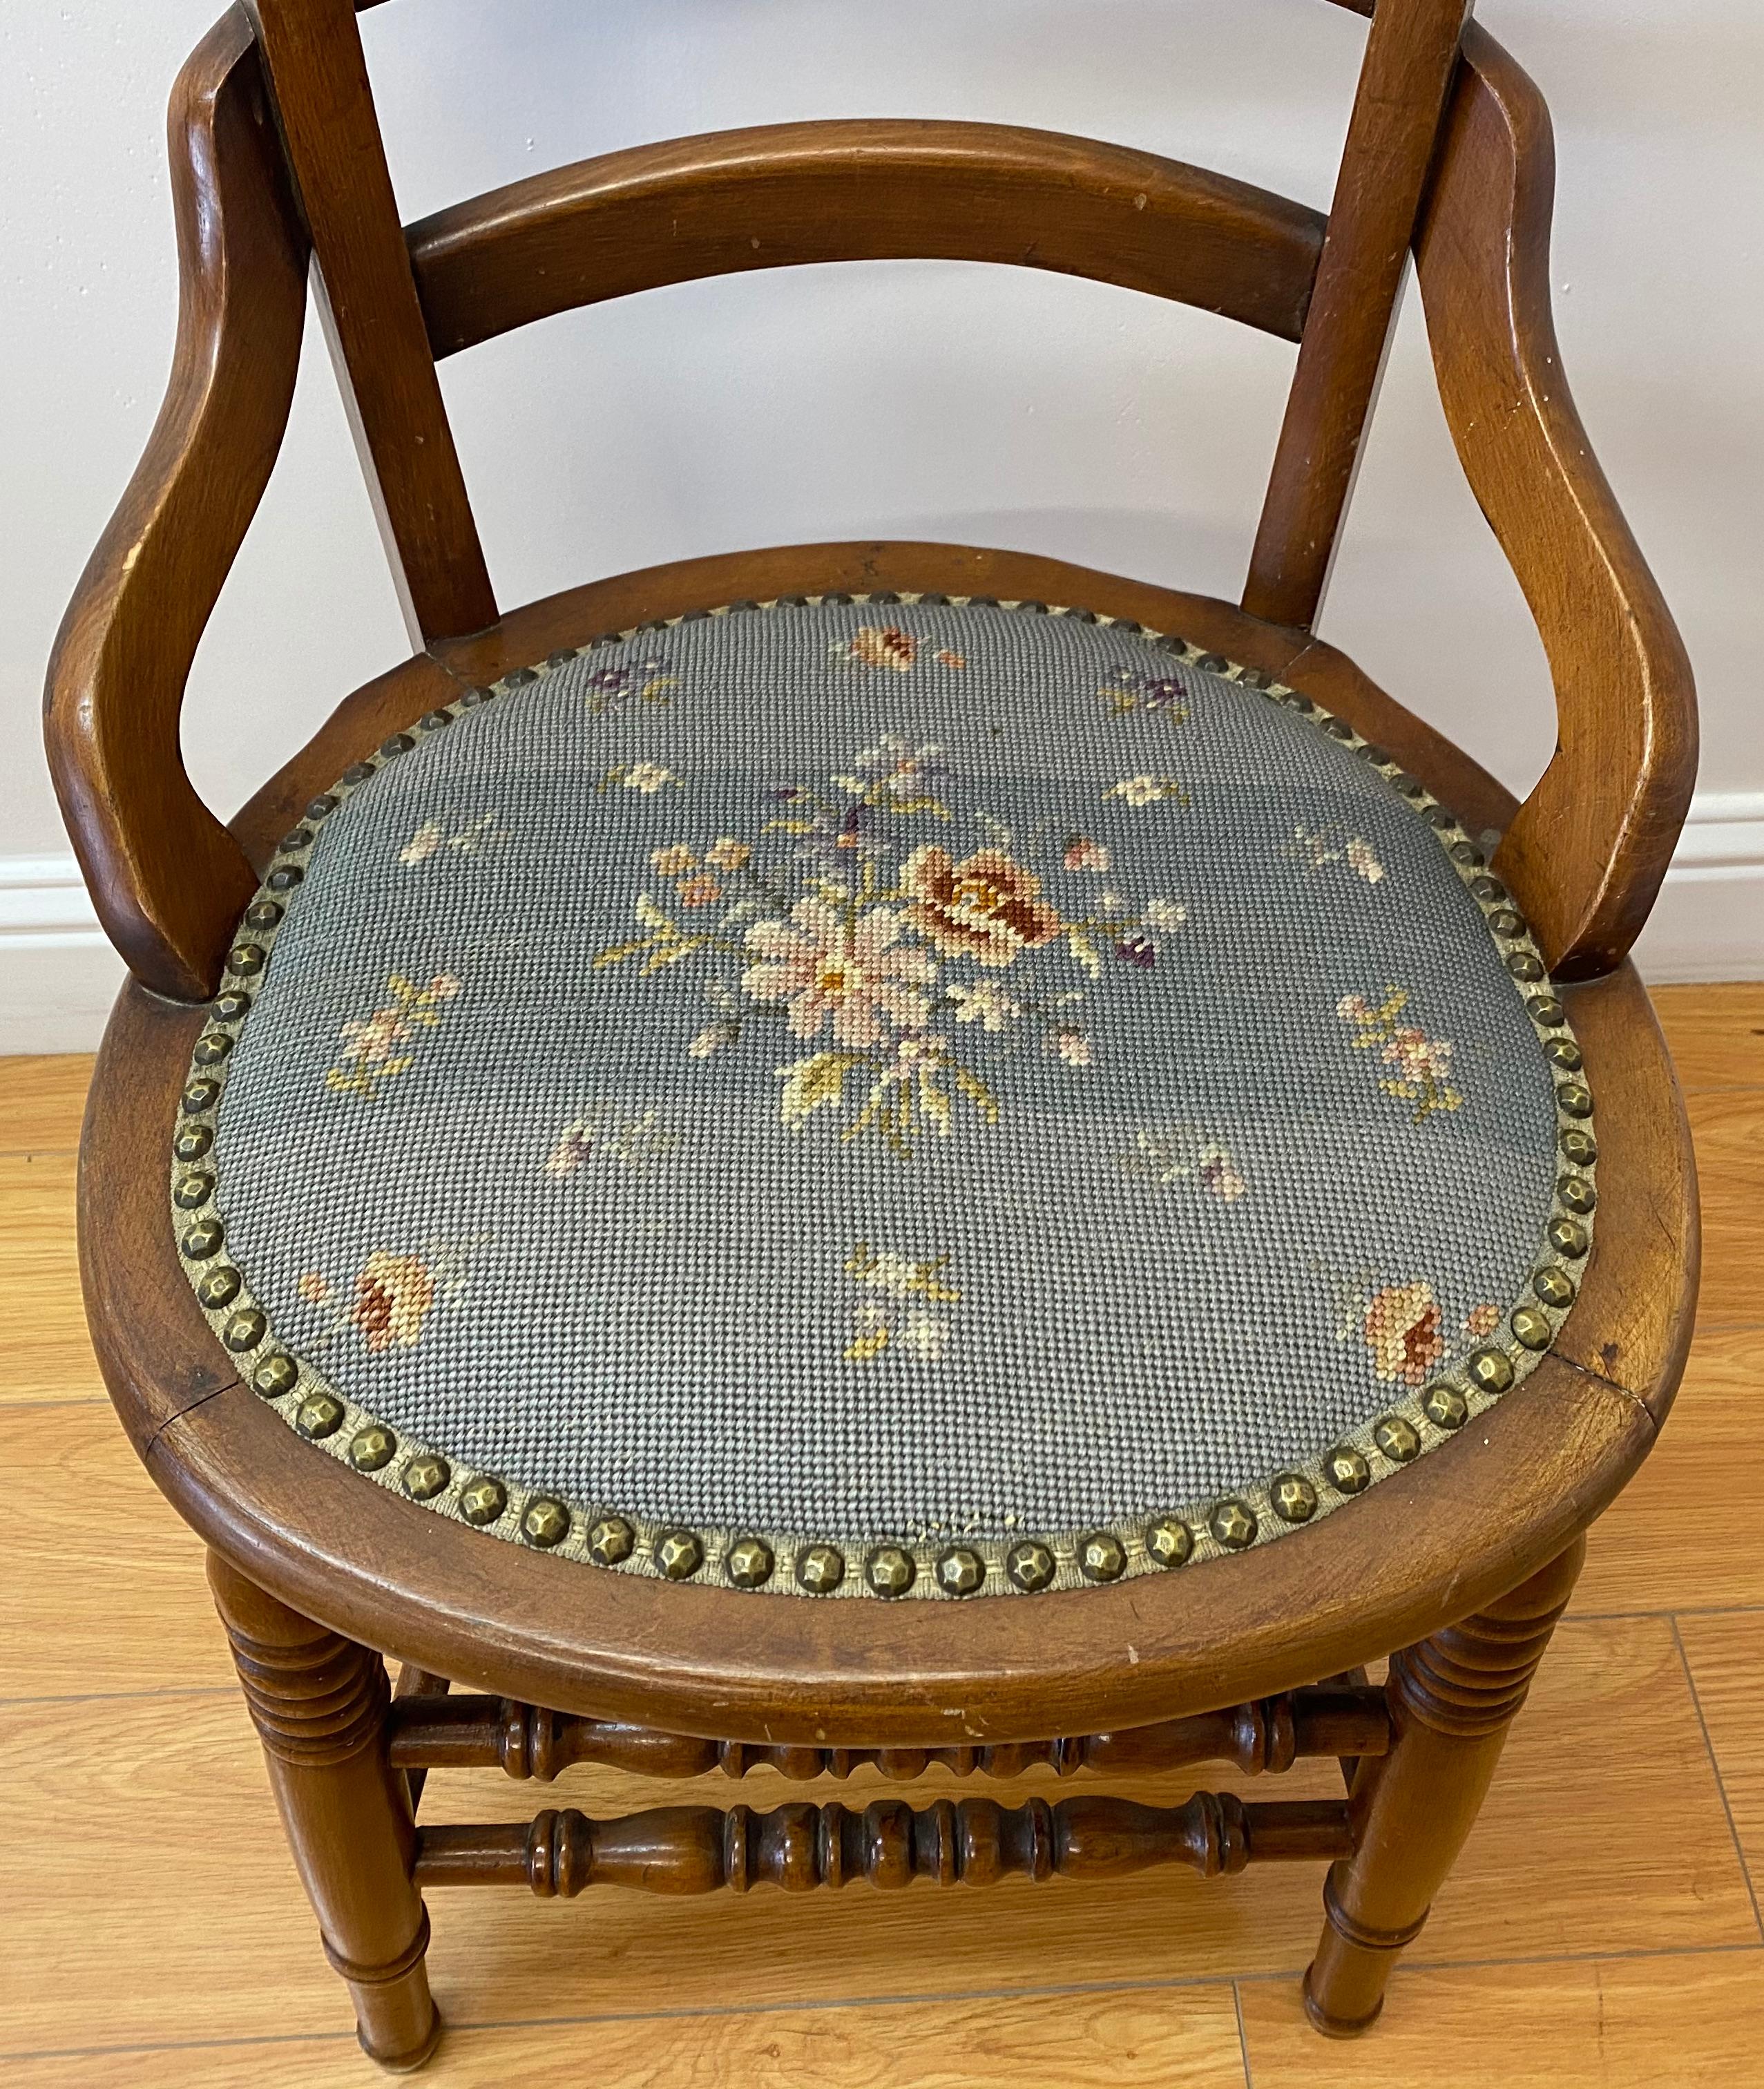 needle point chair